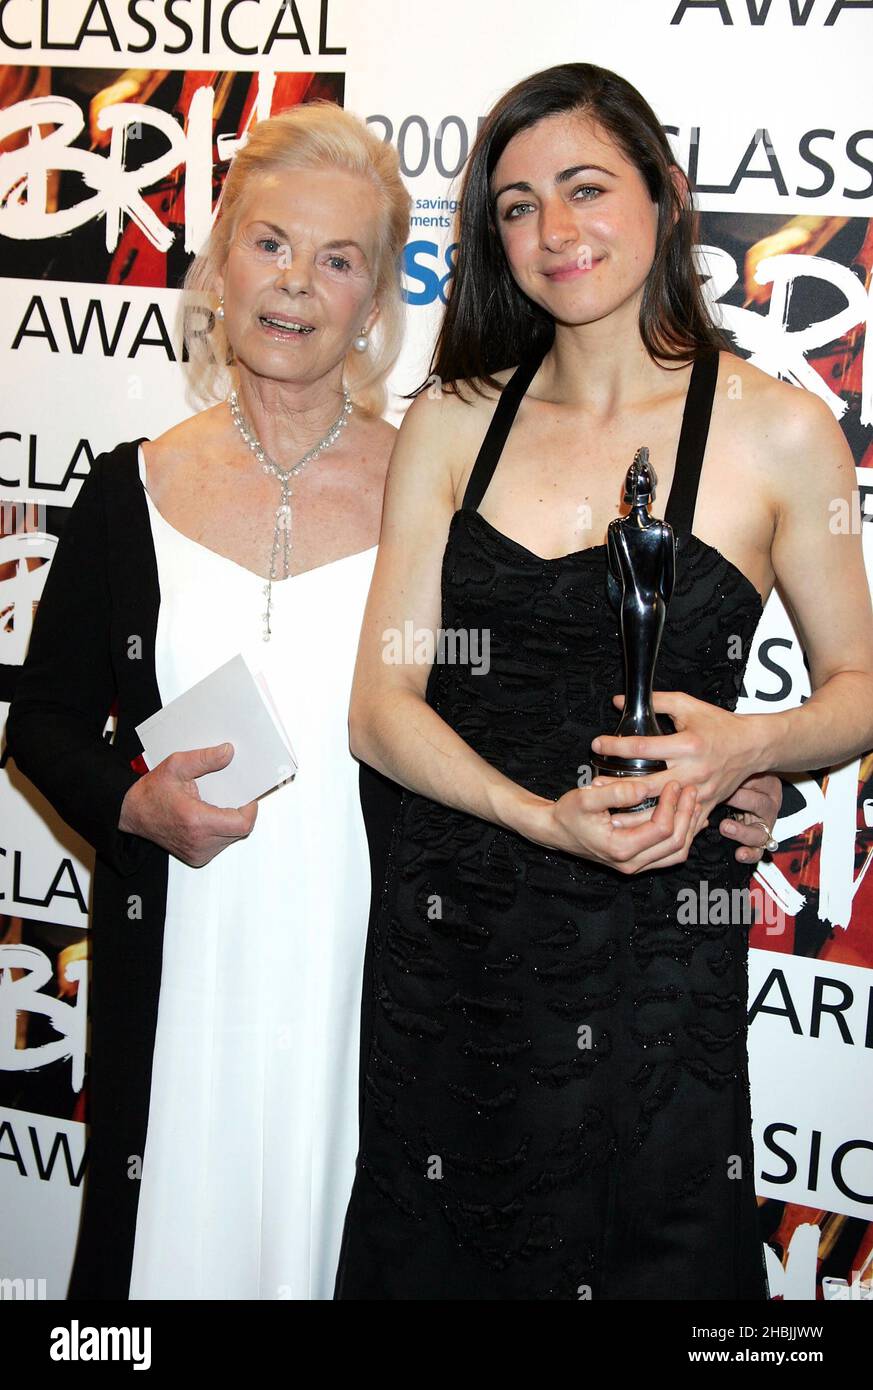 HRH Duchess of Kent poses with Natalie Clein at the Awards Board at the Classical Brit Awards 2005, the annual awards ceremony for classical music, at the Royal Albert Hall in London. Stock Photo